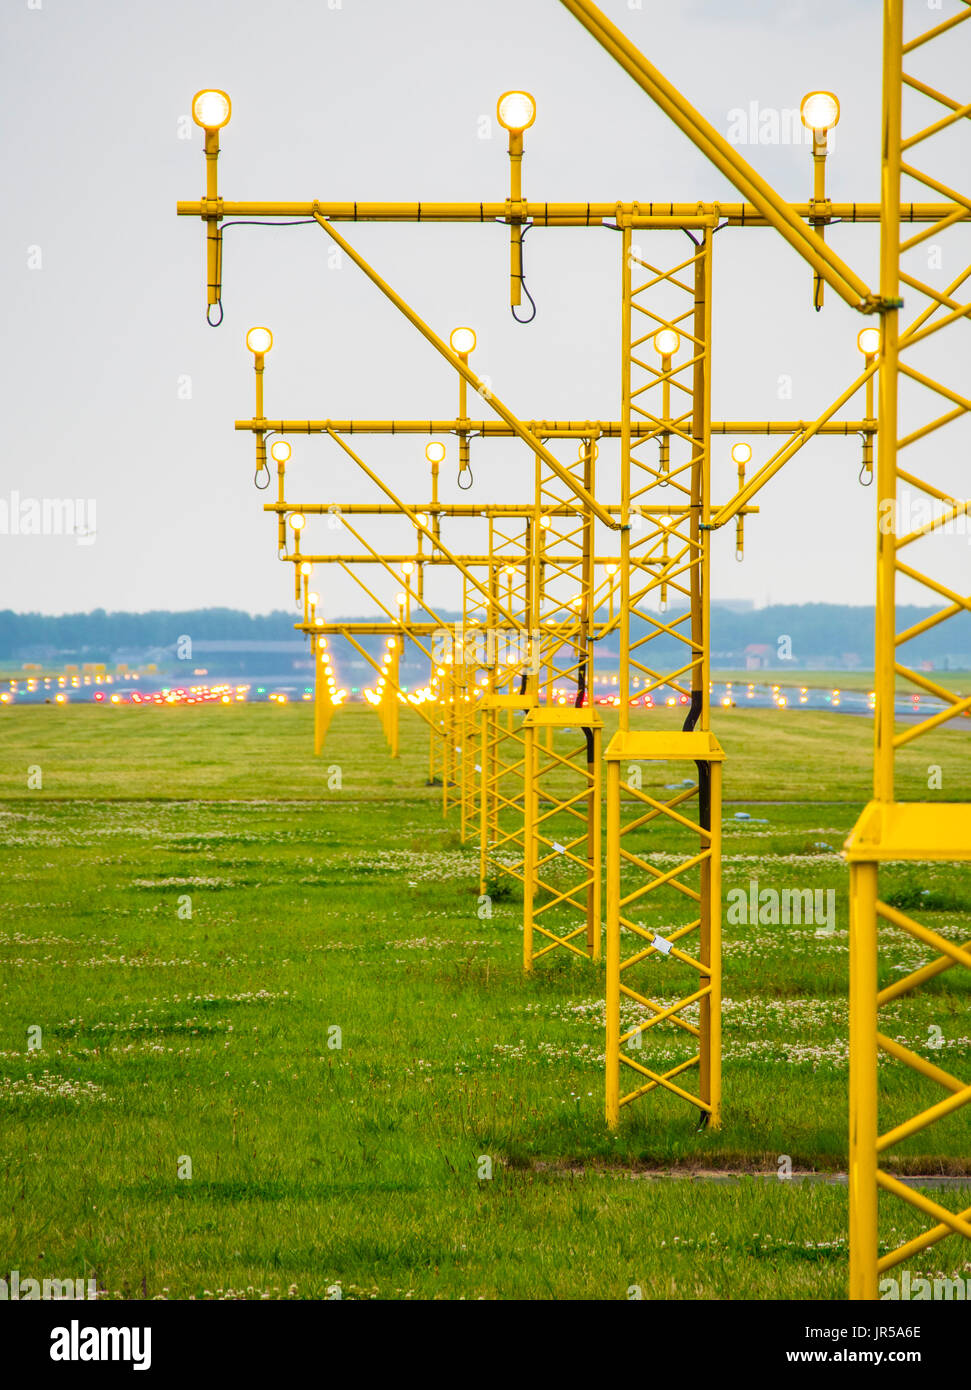 Airport Landing lights at the runway Stock Photo - Alamy